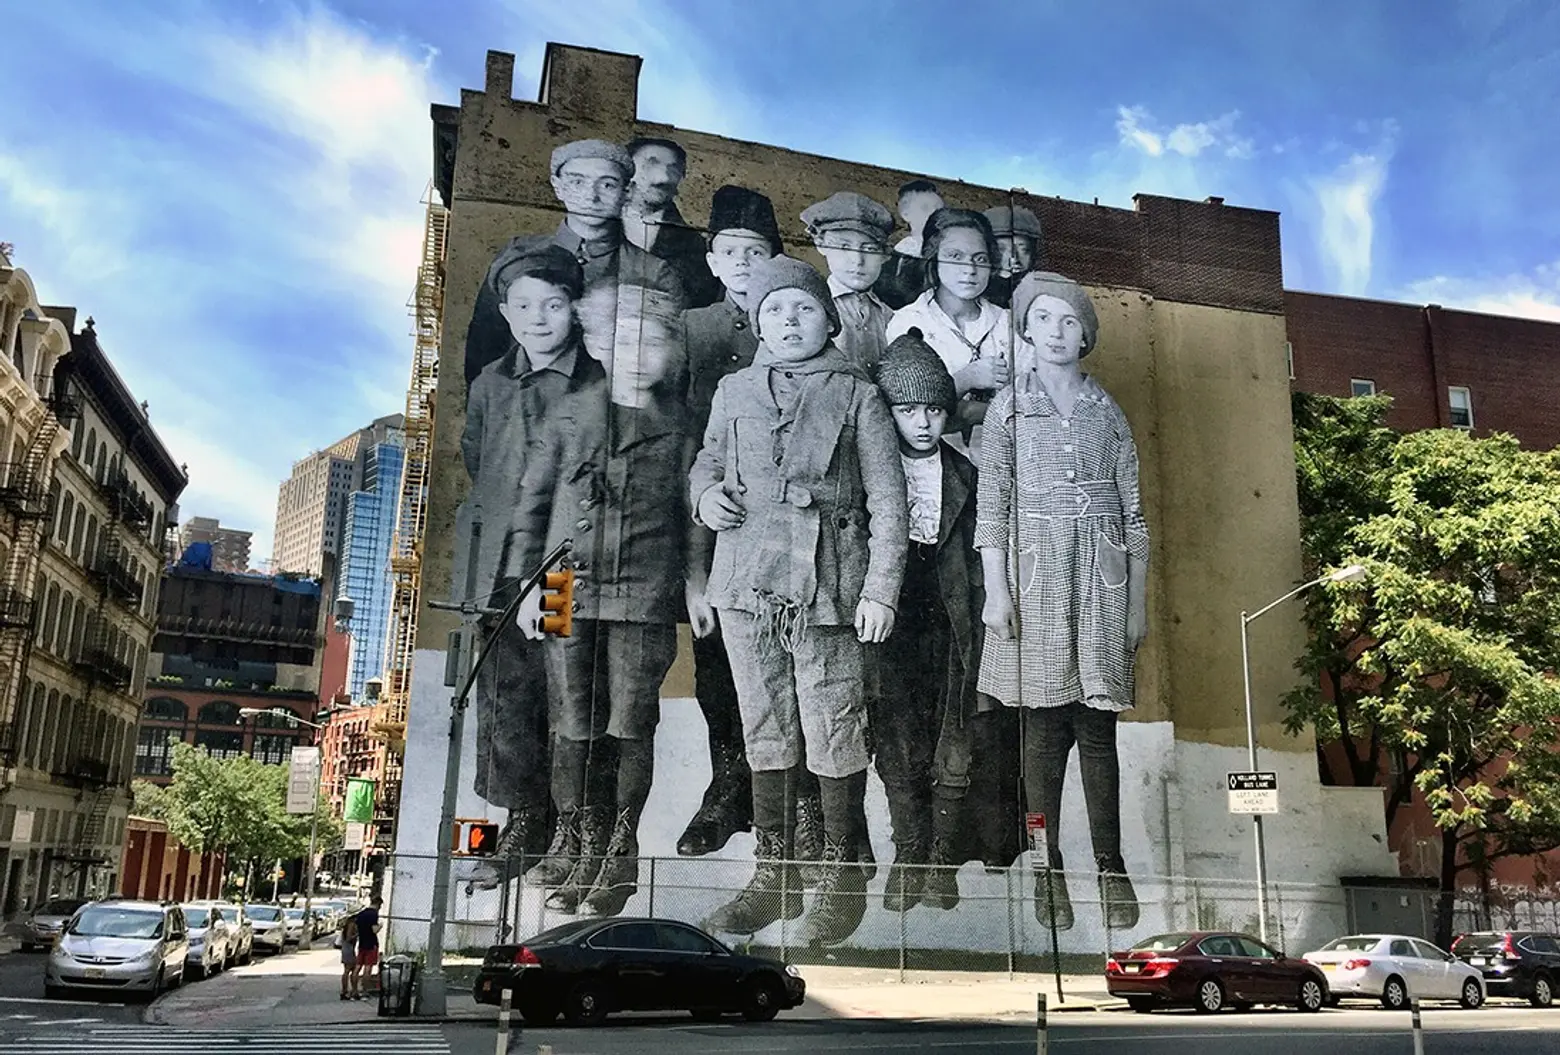 Tribeca Mural Is a Tribute to Ellis Island; New Yorkers Meet Wi-Fi Kiosks With Mixed Reviews